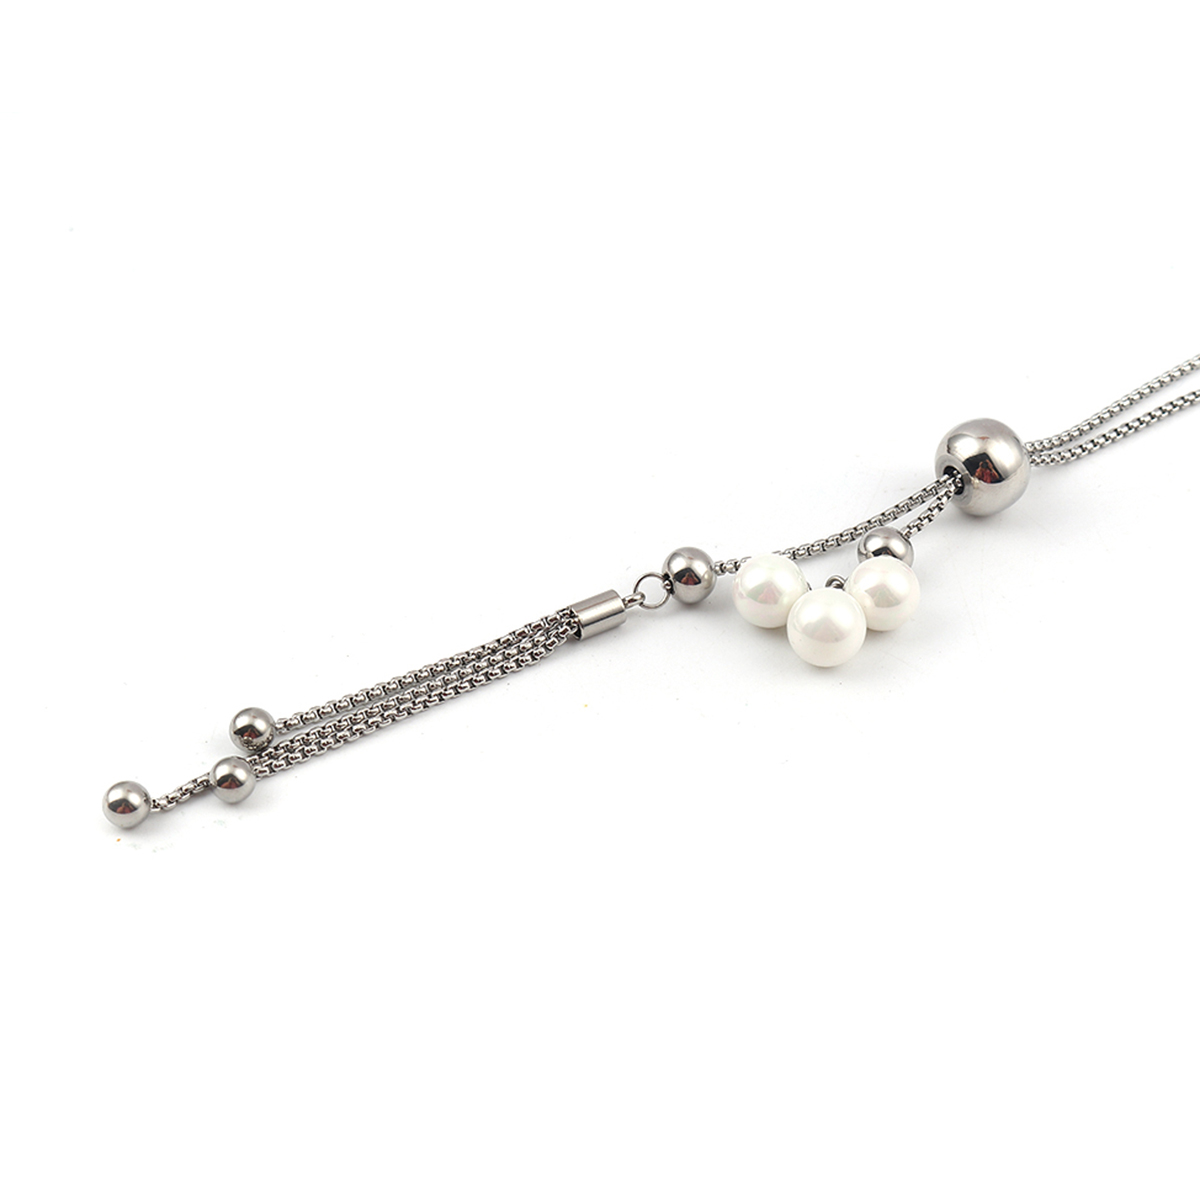 Picture of 304 Stainless Steel Adjustable Slider/ Slide Sweater Necklace Long Silver Tone Tassel Triple White Round Imitation Pearl 73cm(28 6/8") long, 1 Piece